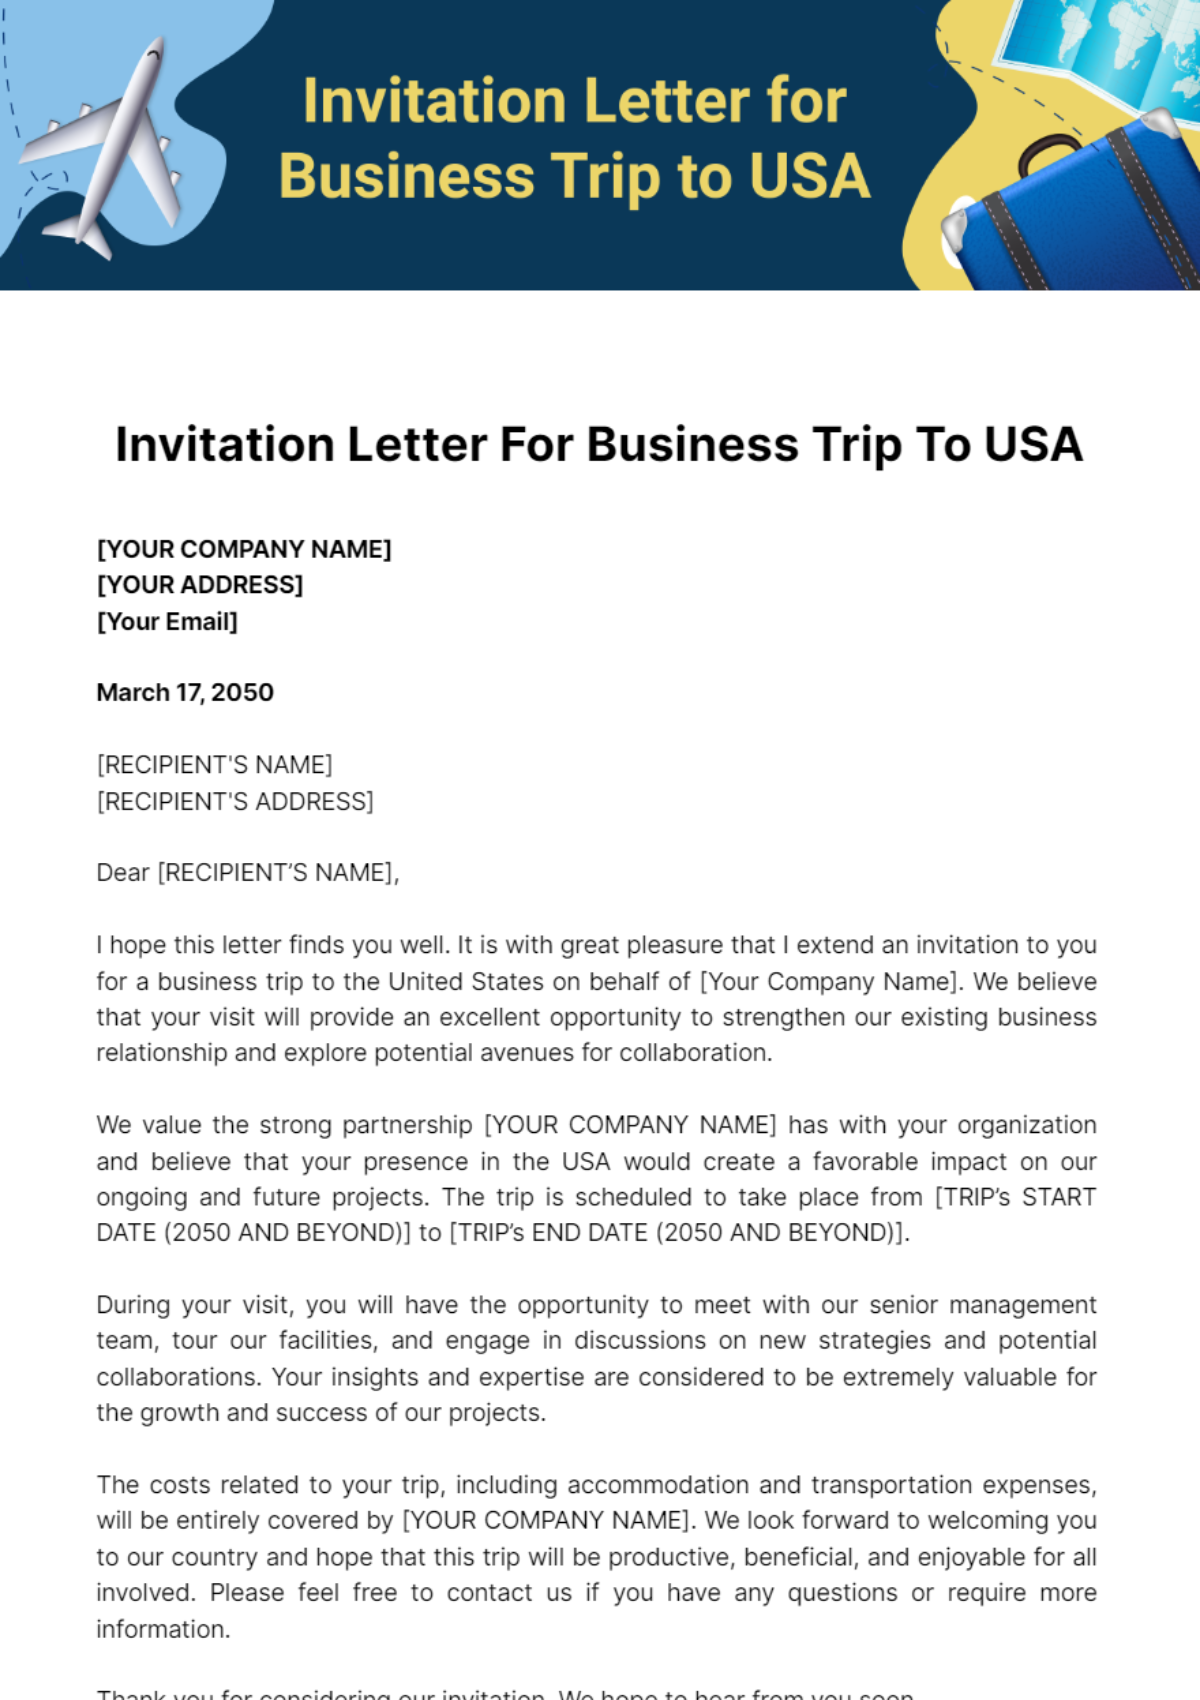 Free Invitation Letter for Business Trip to USA Template